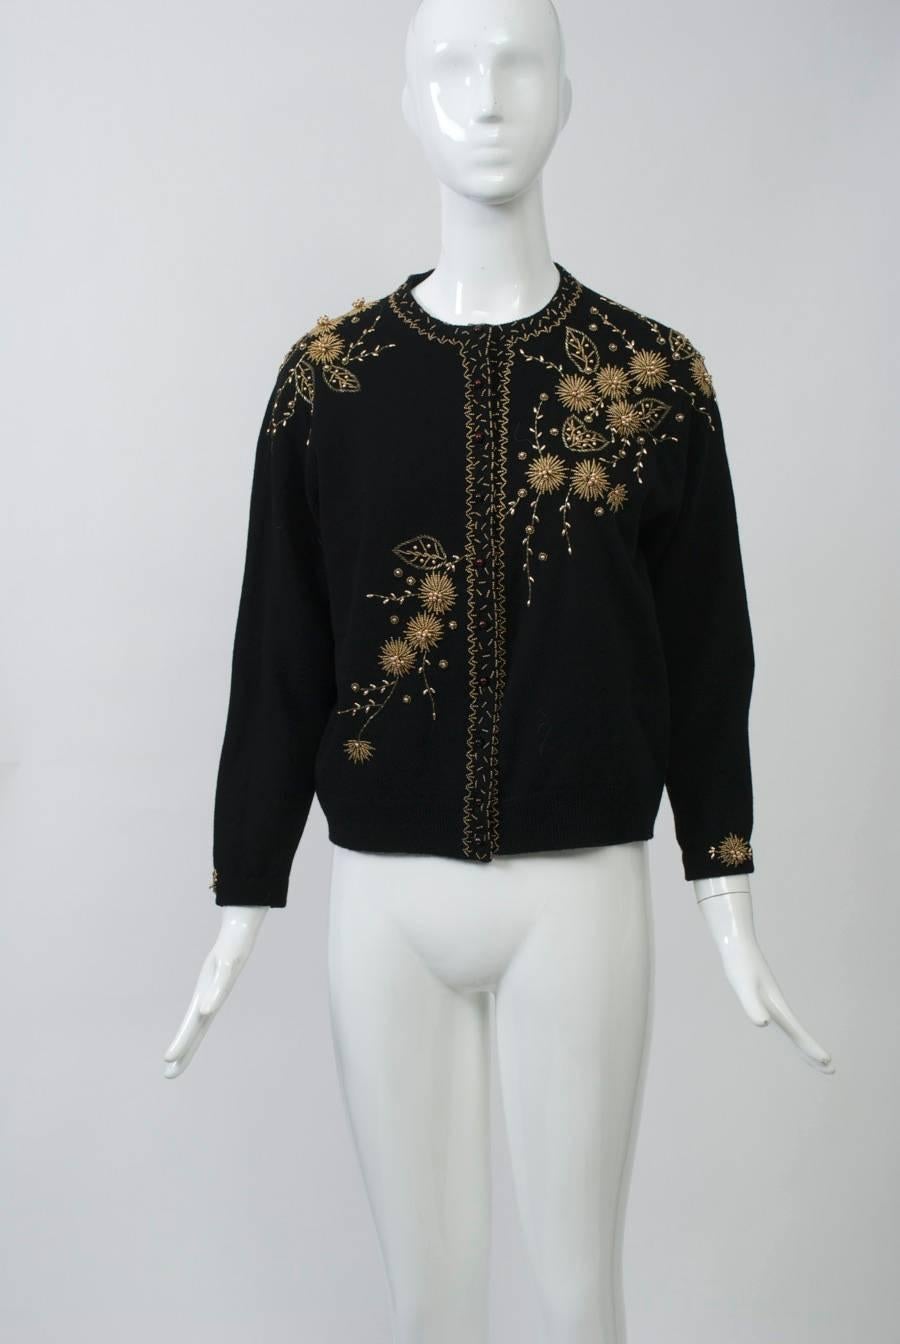 Nice beading and condition on this vintage cardigan in black wool. Gold beading in a floral pattern applied diagonally across the front and in center back and wrists. Simple gold beaded border around neck and front. Dark pearl buttons. Lined.